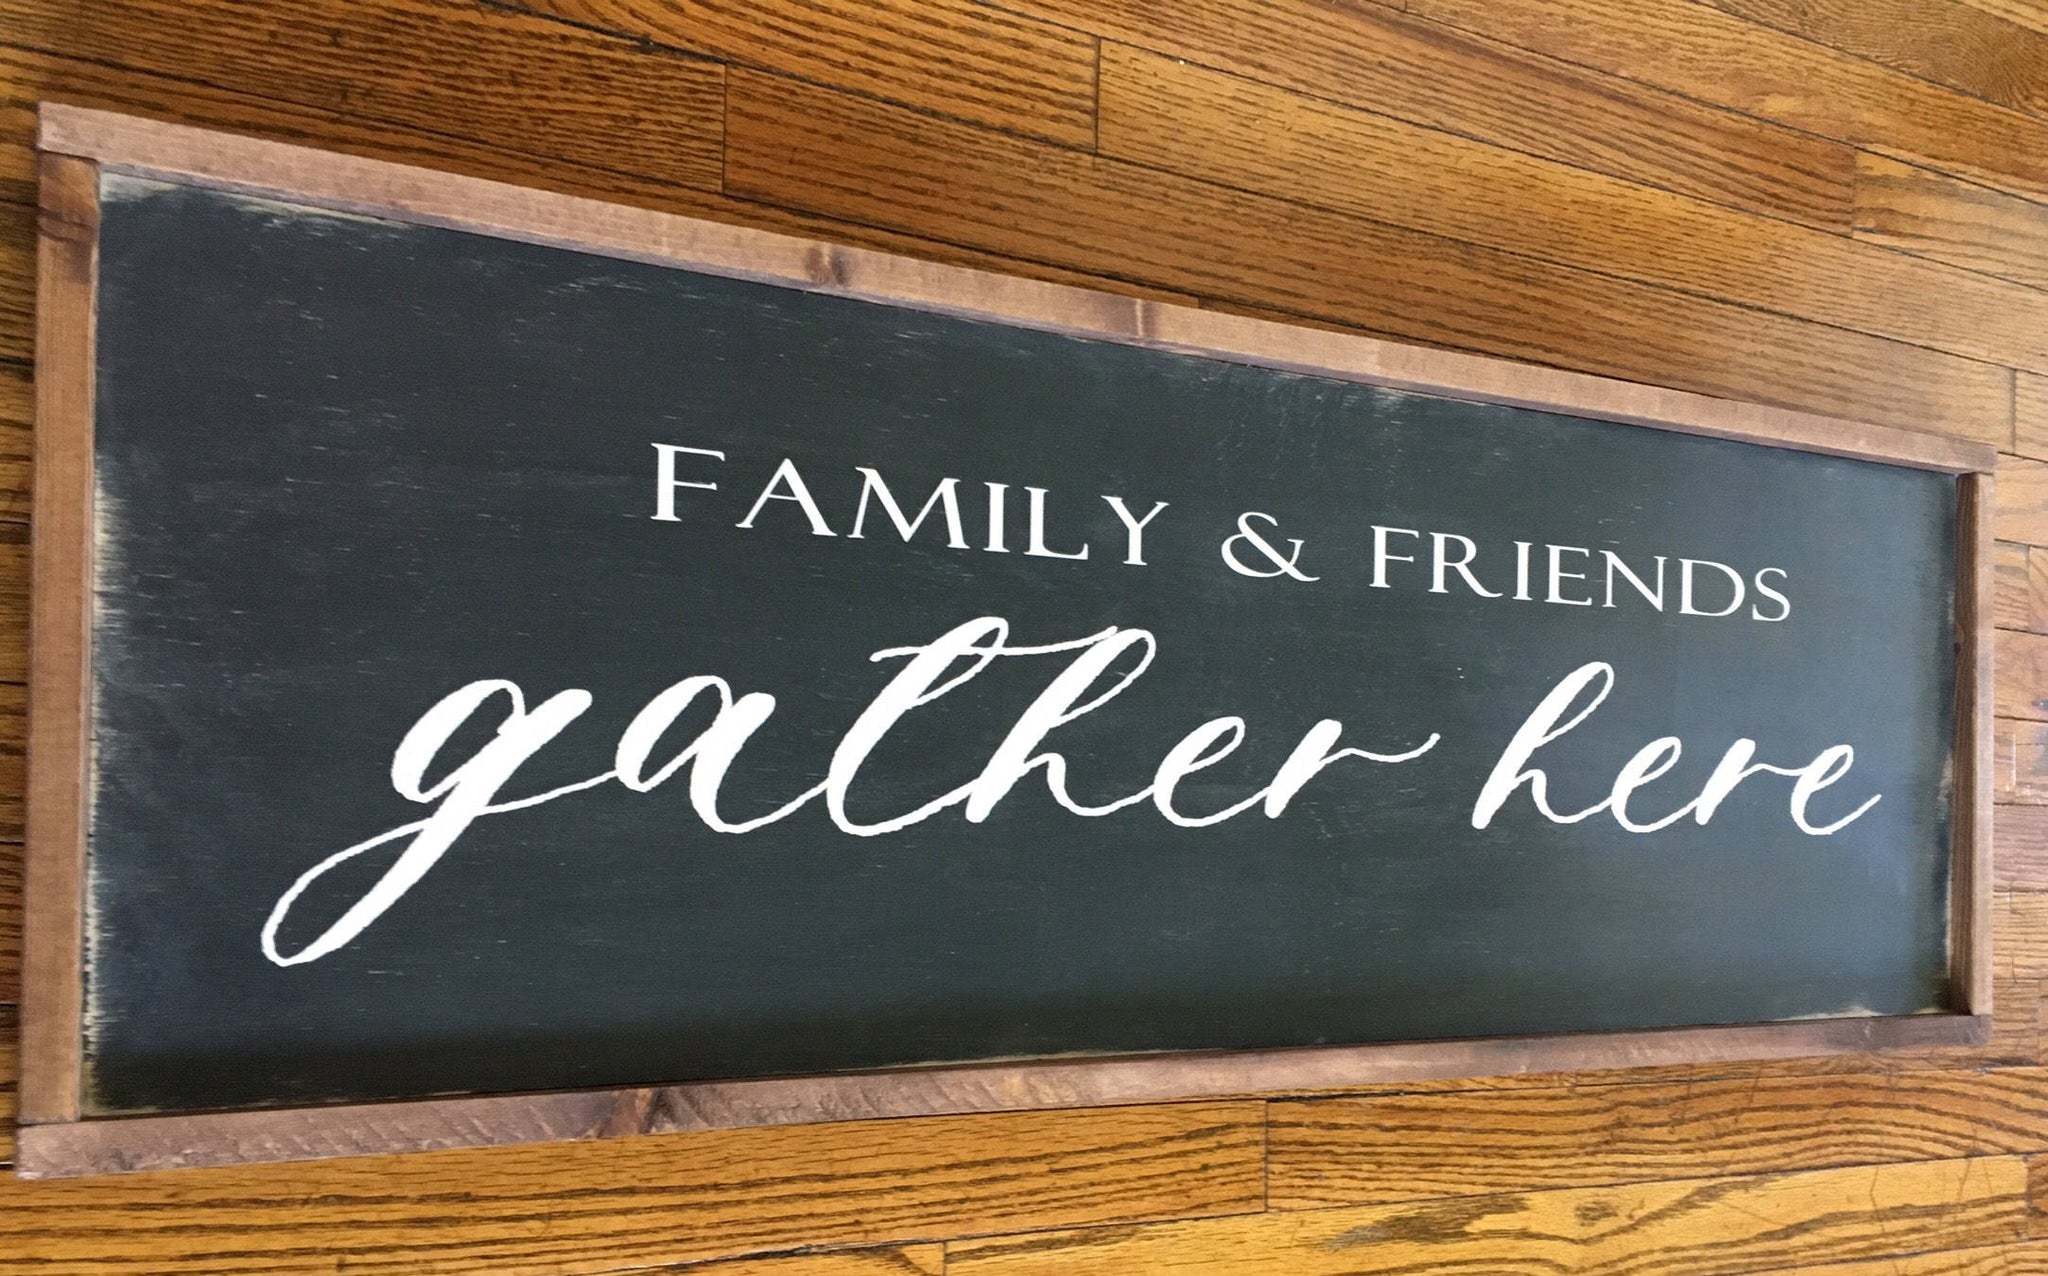 Family & Friends Gather Here Wood sign